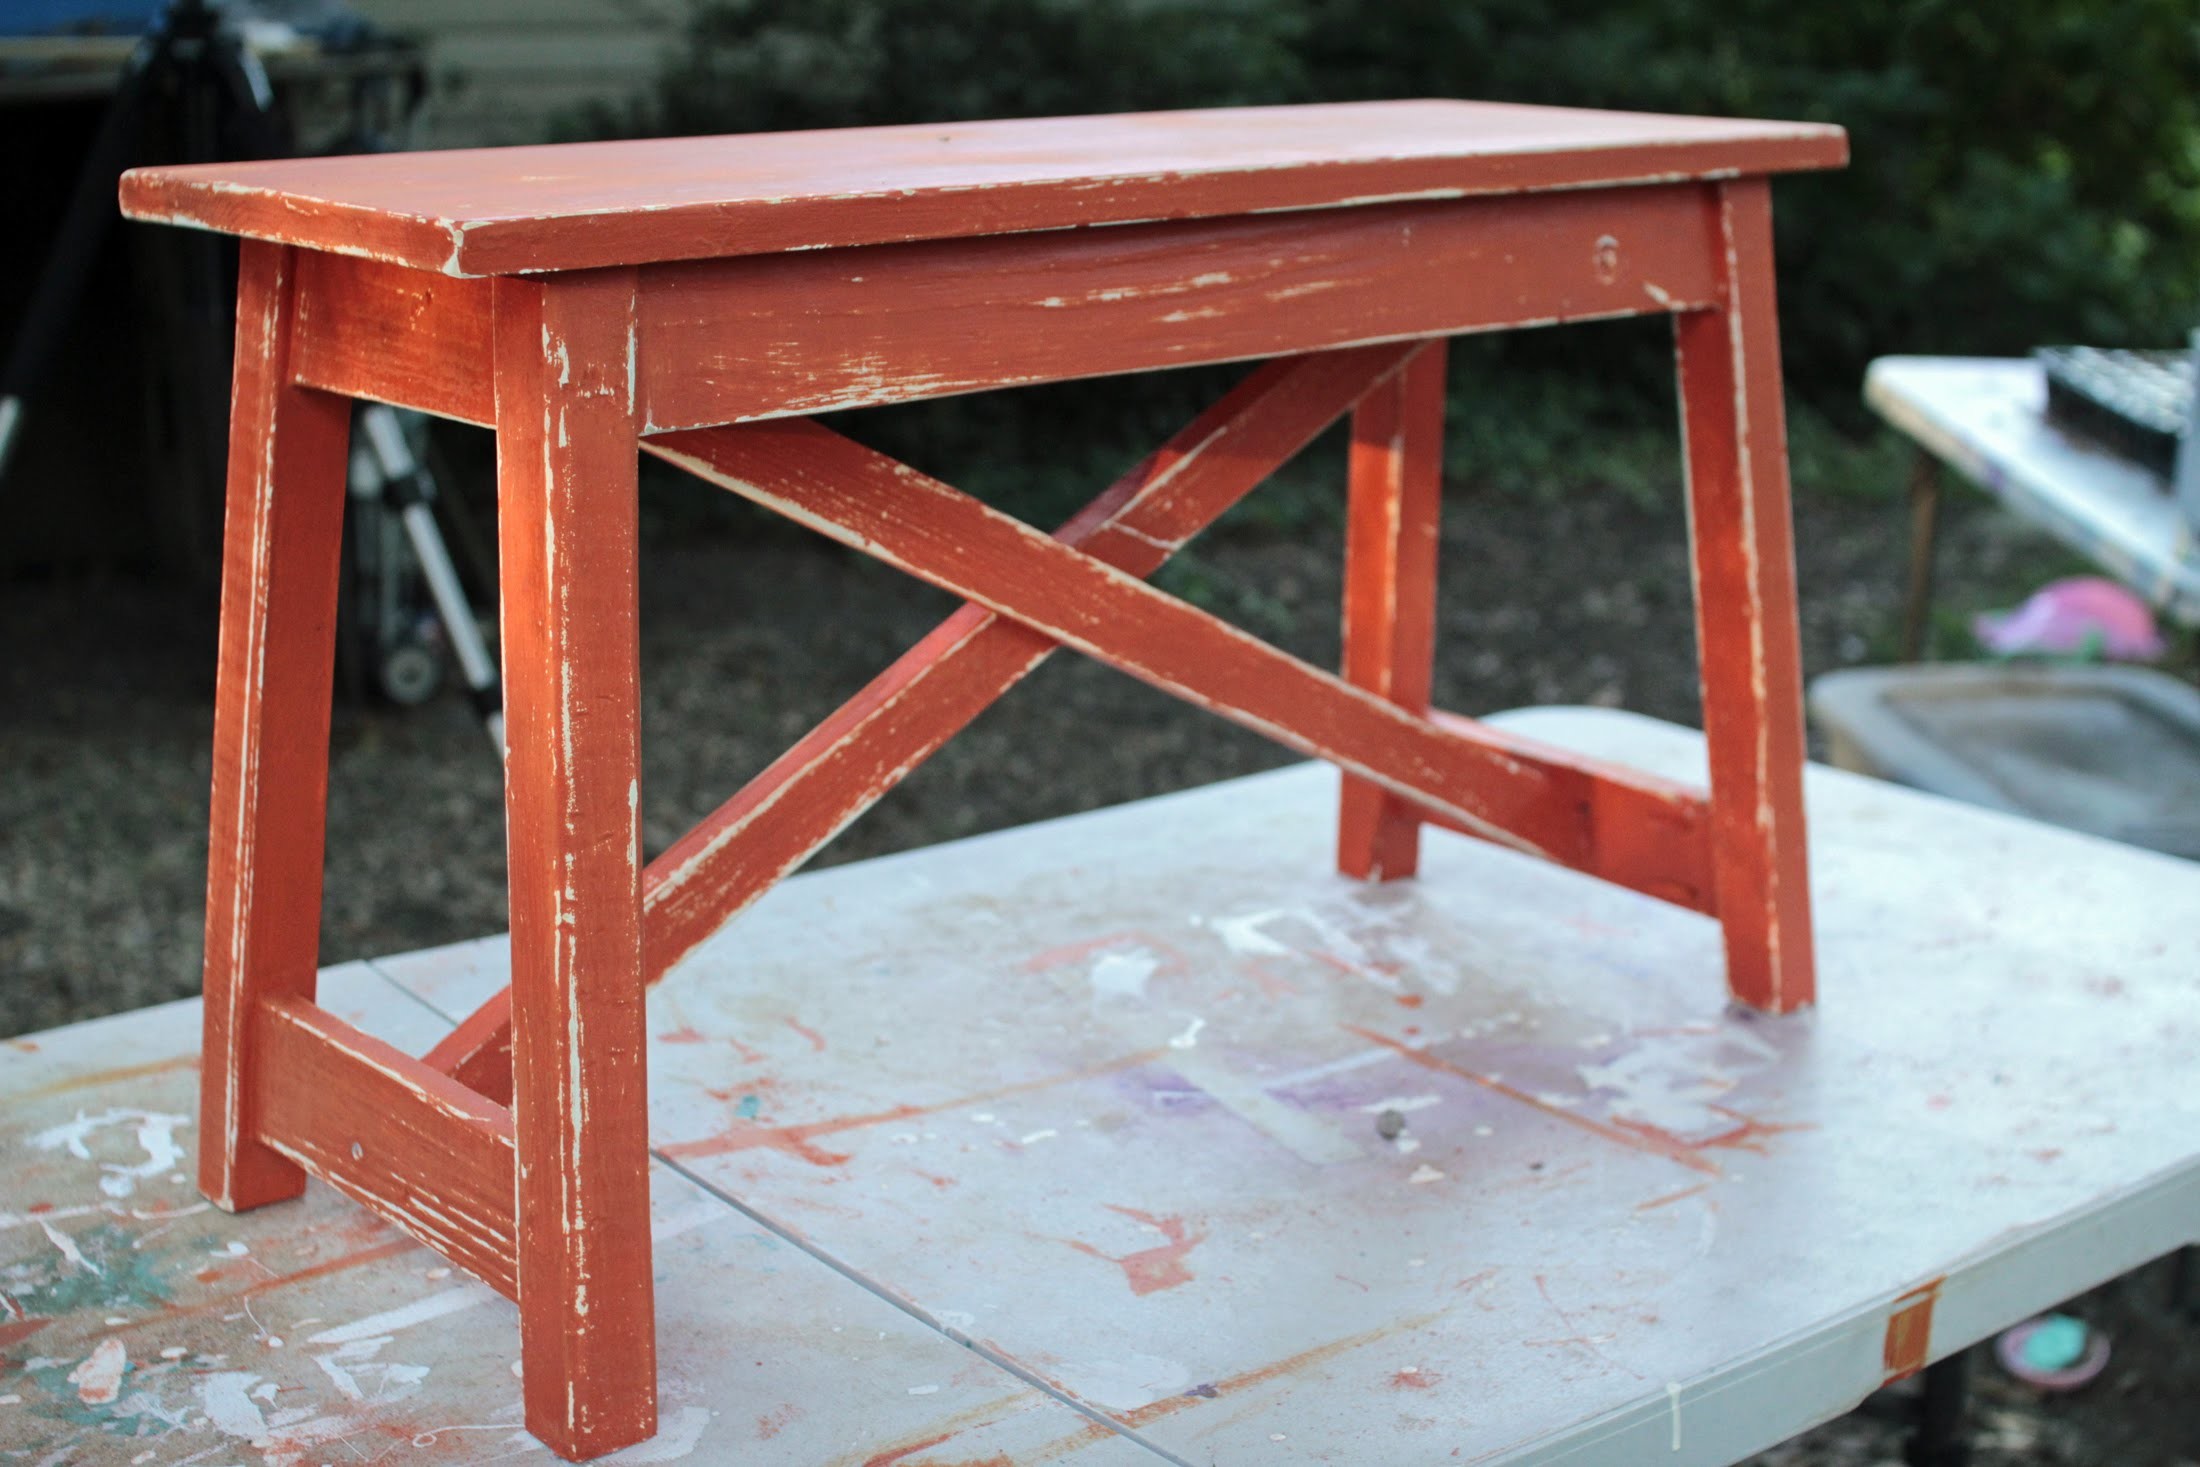 How to Paint and Distress a Rustic Wooden Bench- en español